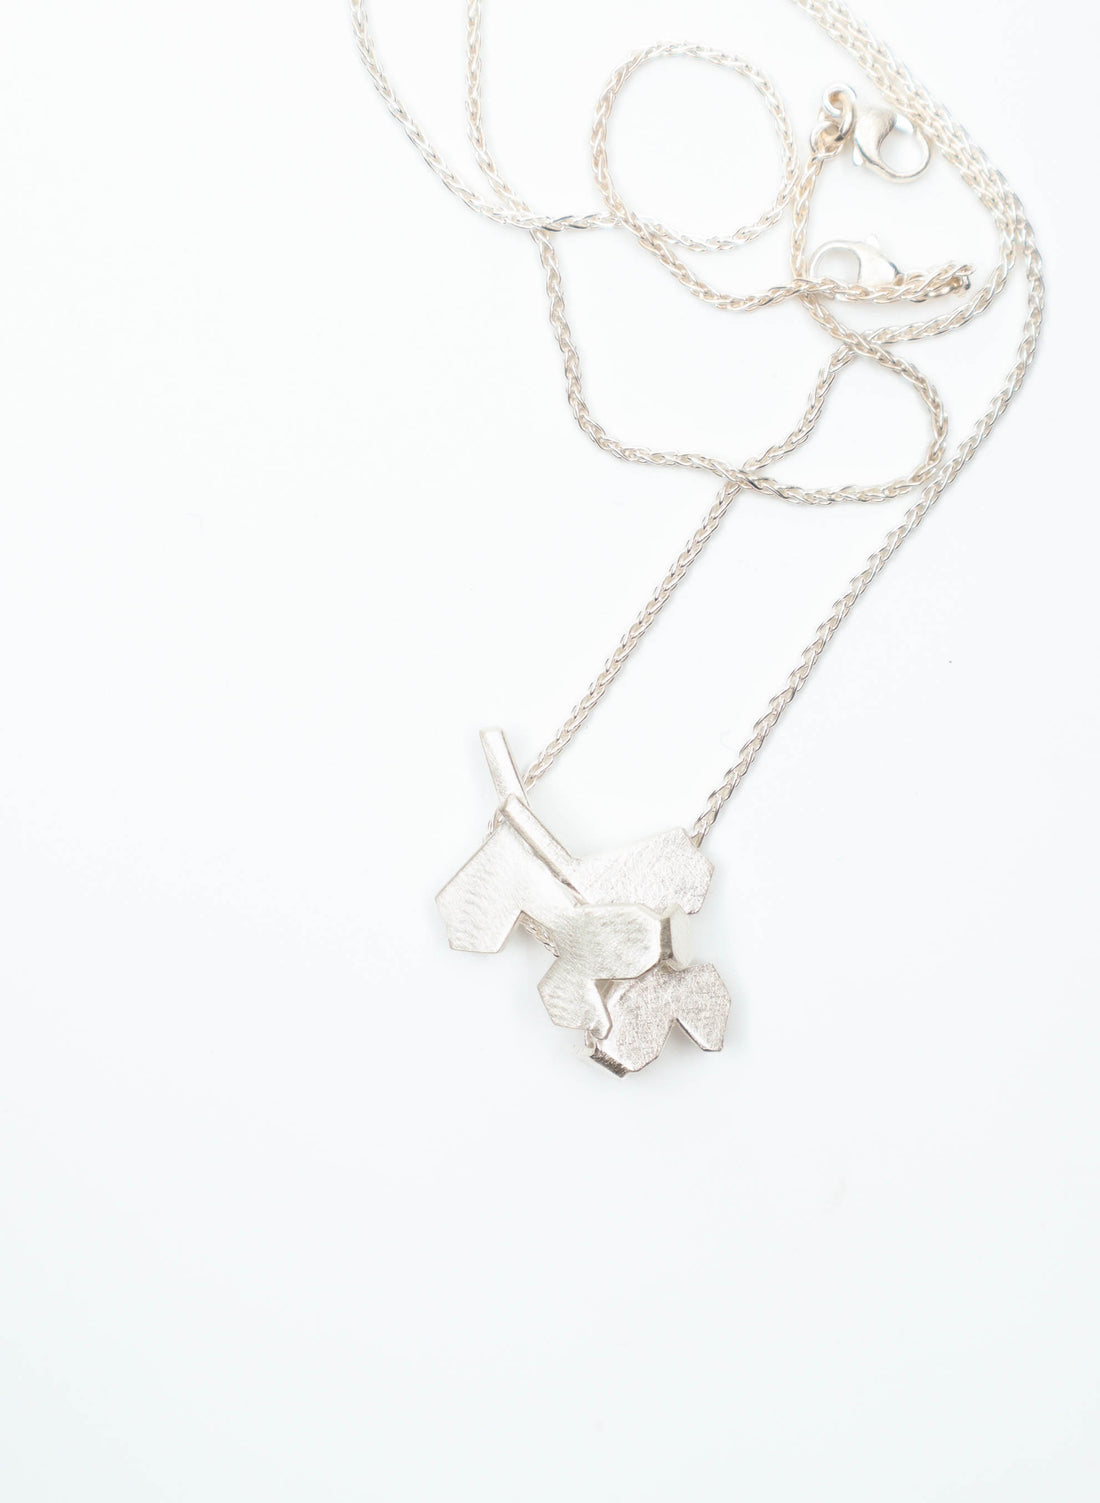 Intertwined Leaf Structure Necklace